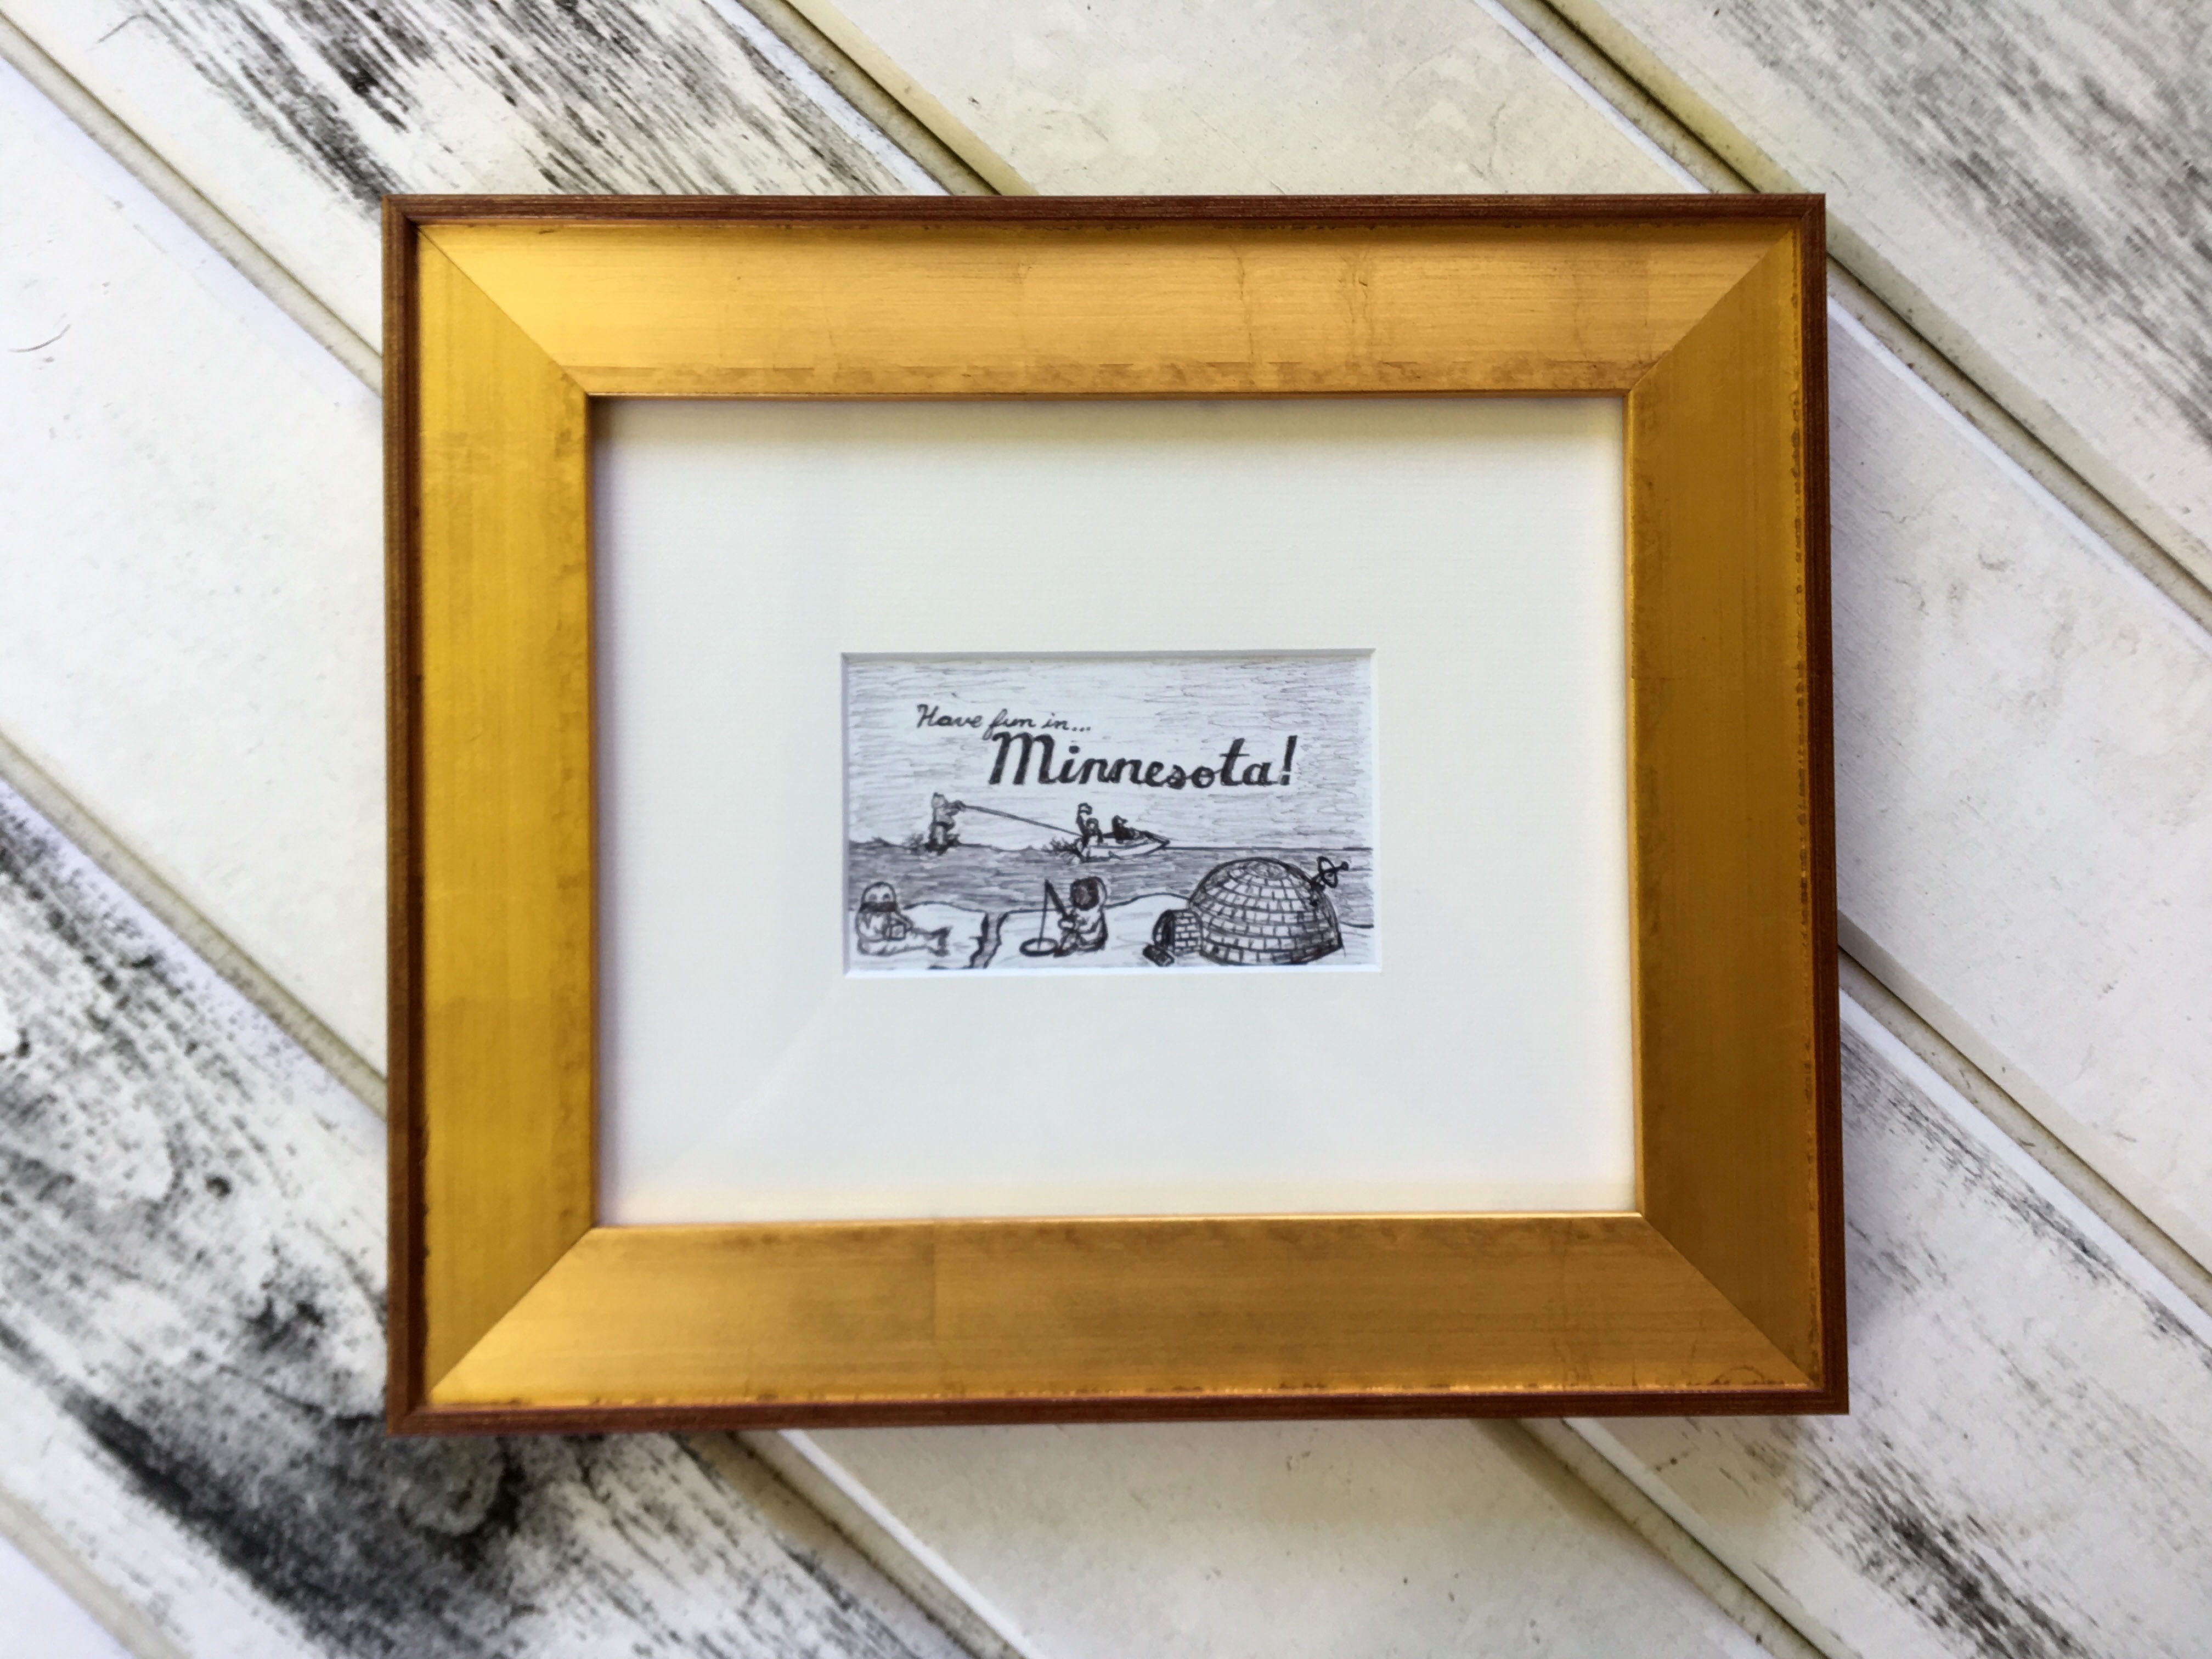 Minnesota Drawing in Classic Gold Picture Frame